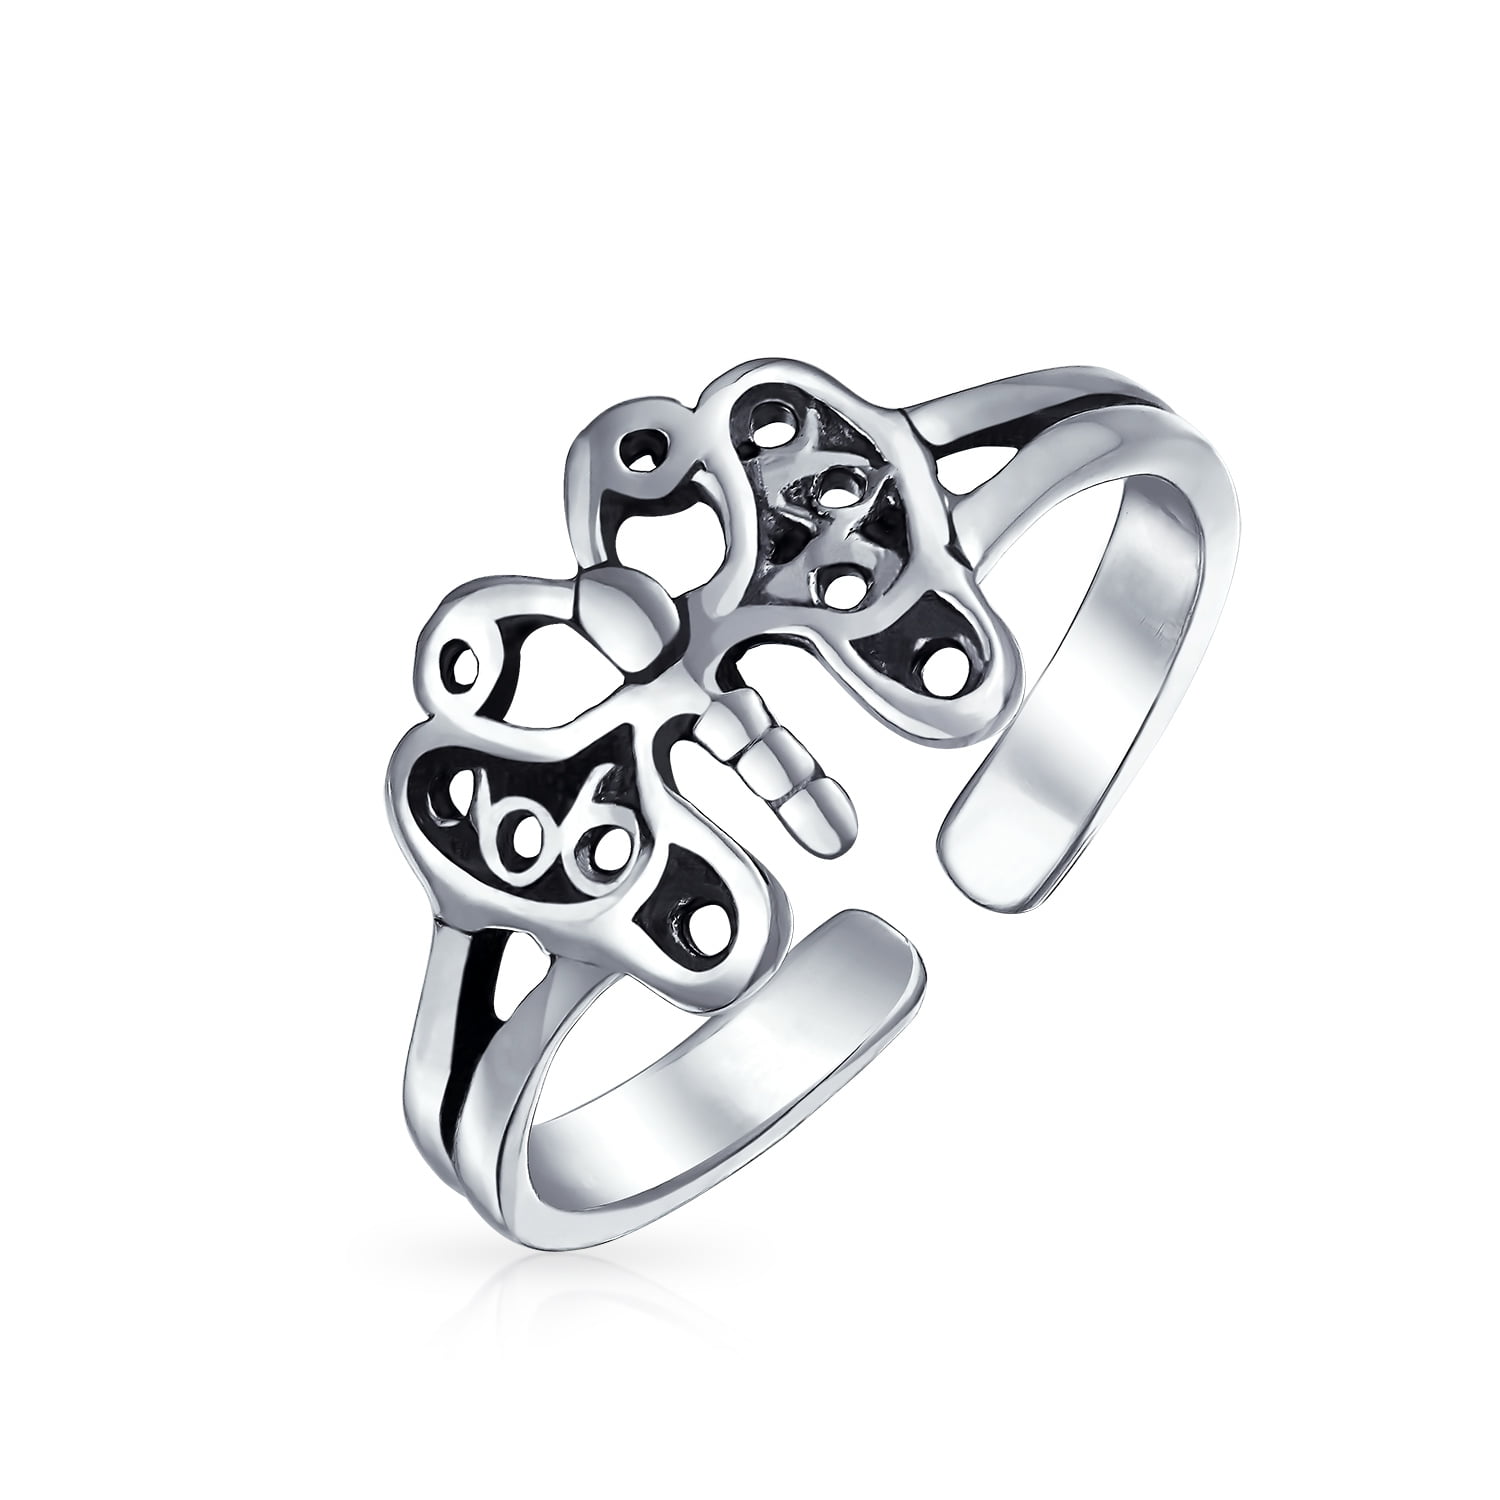 .925 Sterling Silver CZ Butterfly Adjustable Toe Ring